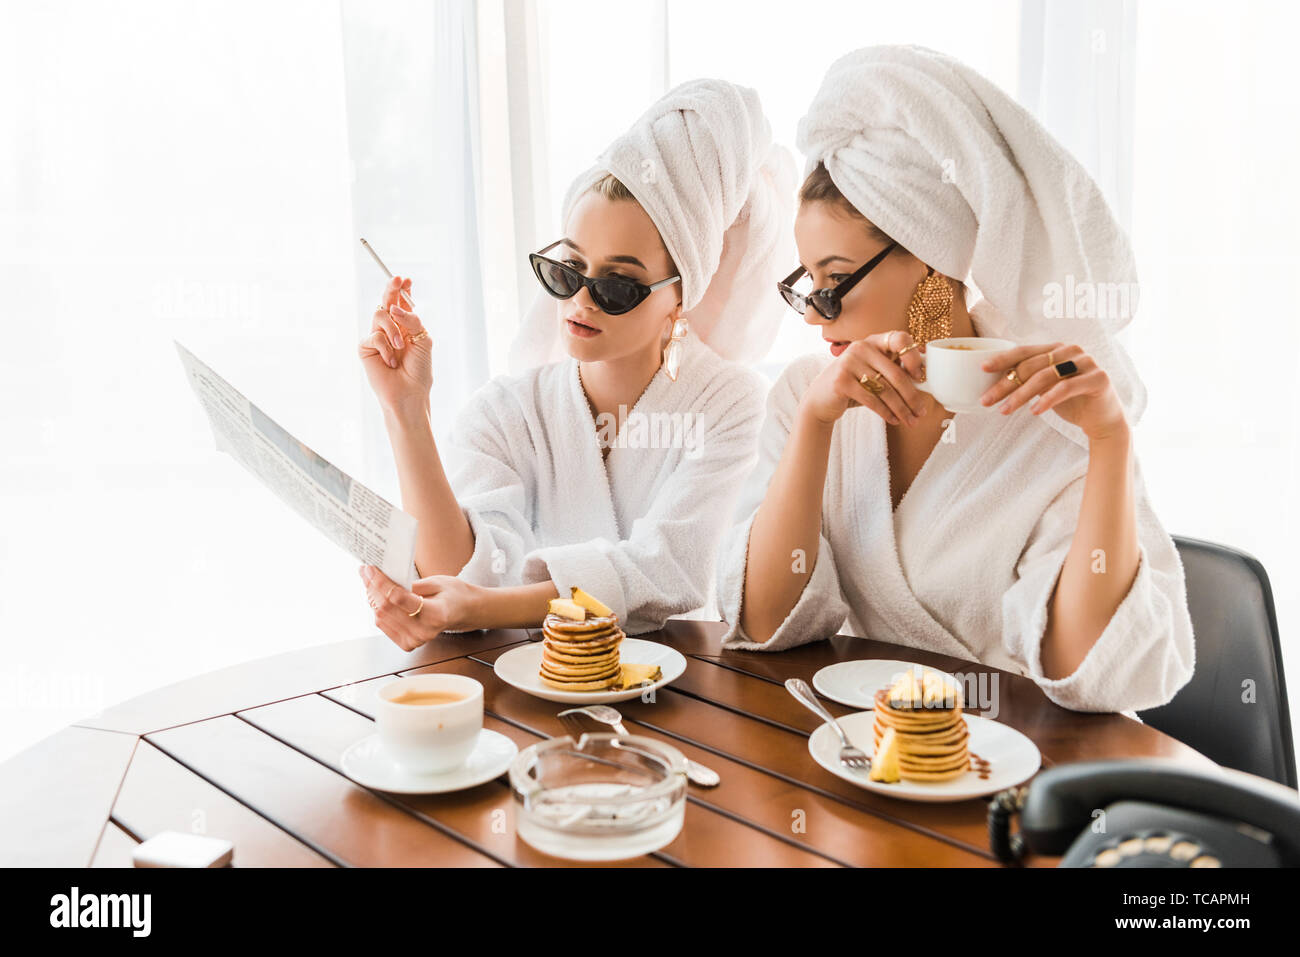 stylish women in bathrobes, sunglasses and jewelry with towels on heads smoking cigarette and reading newspaper while having breakfast Stock Photo